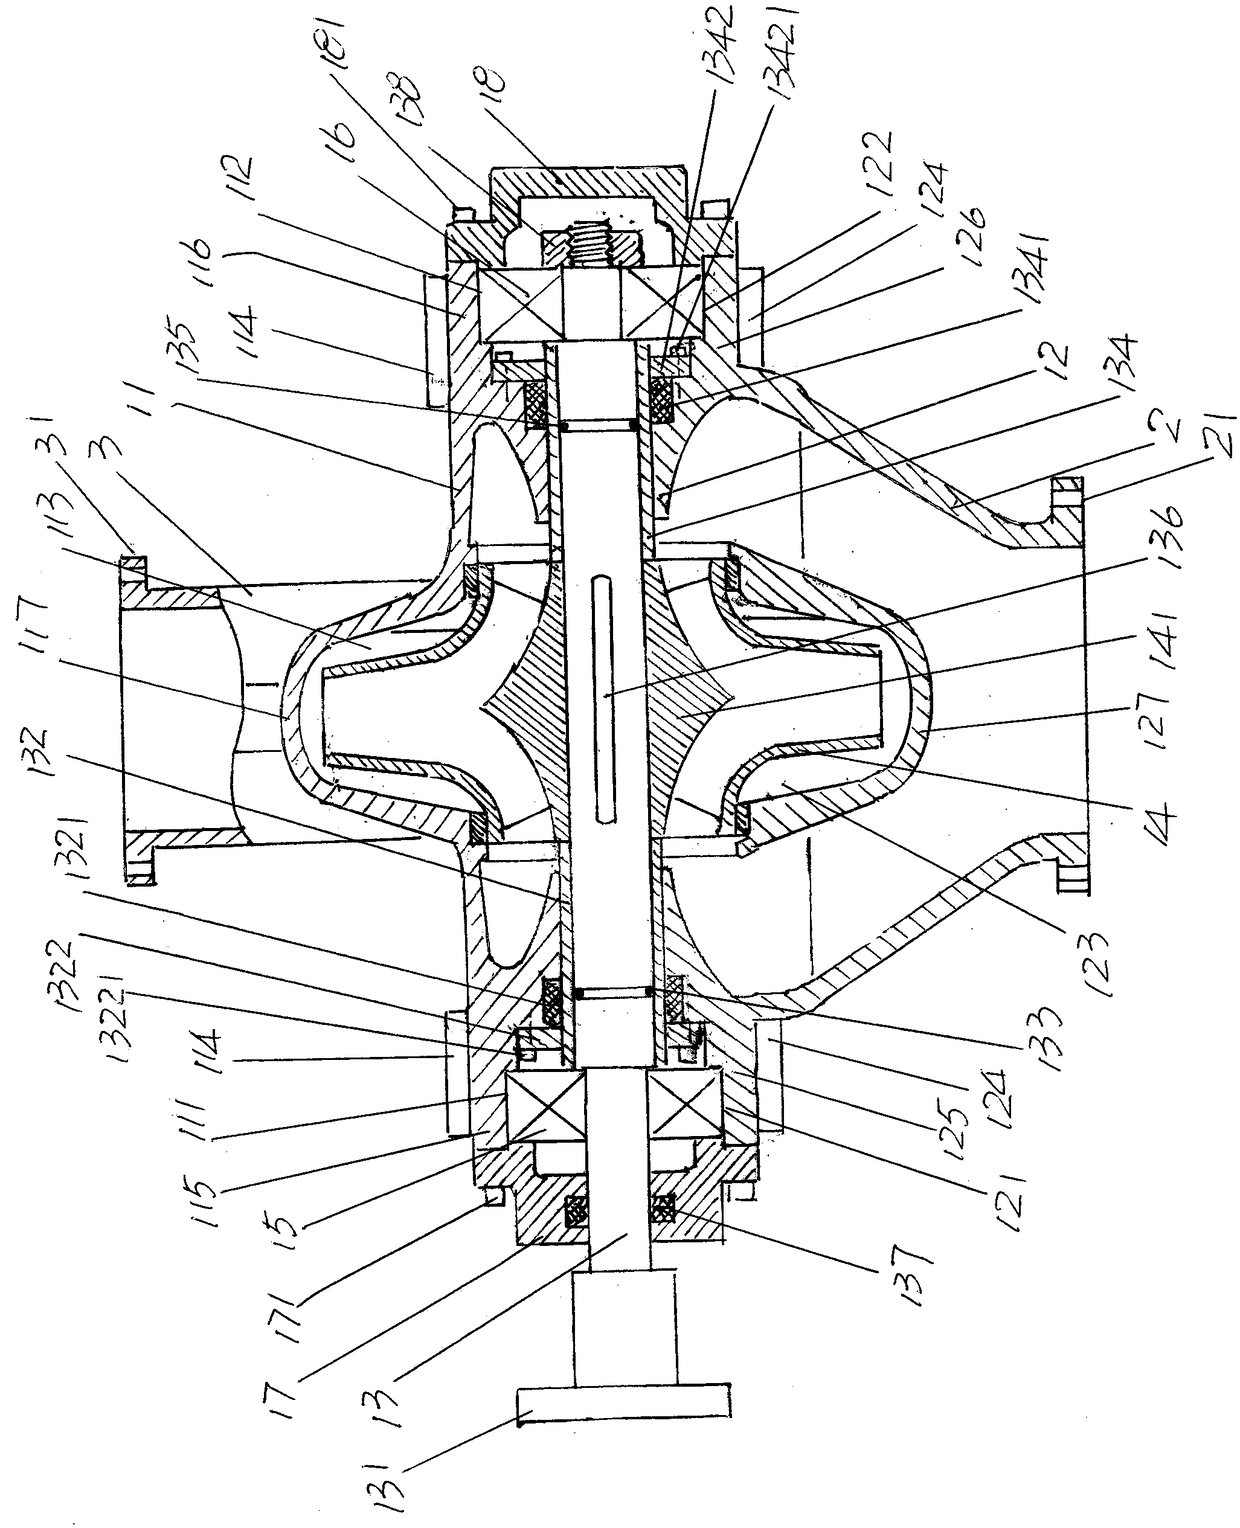 Fire pump structure for fire fighting vehicle